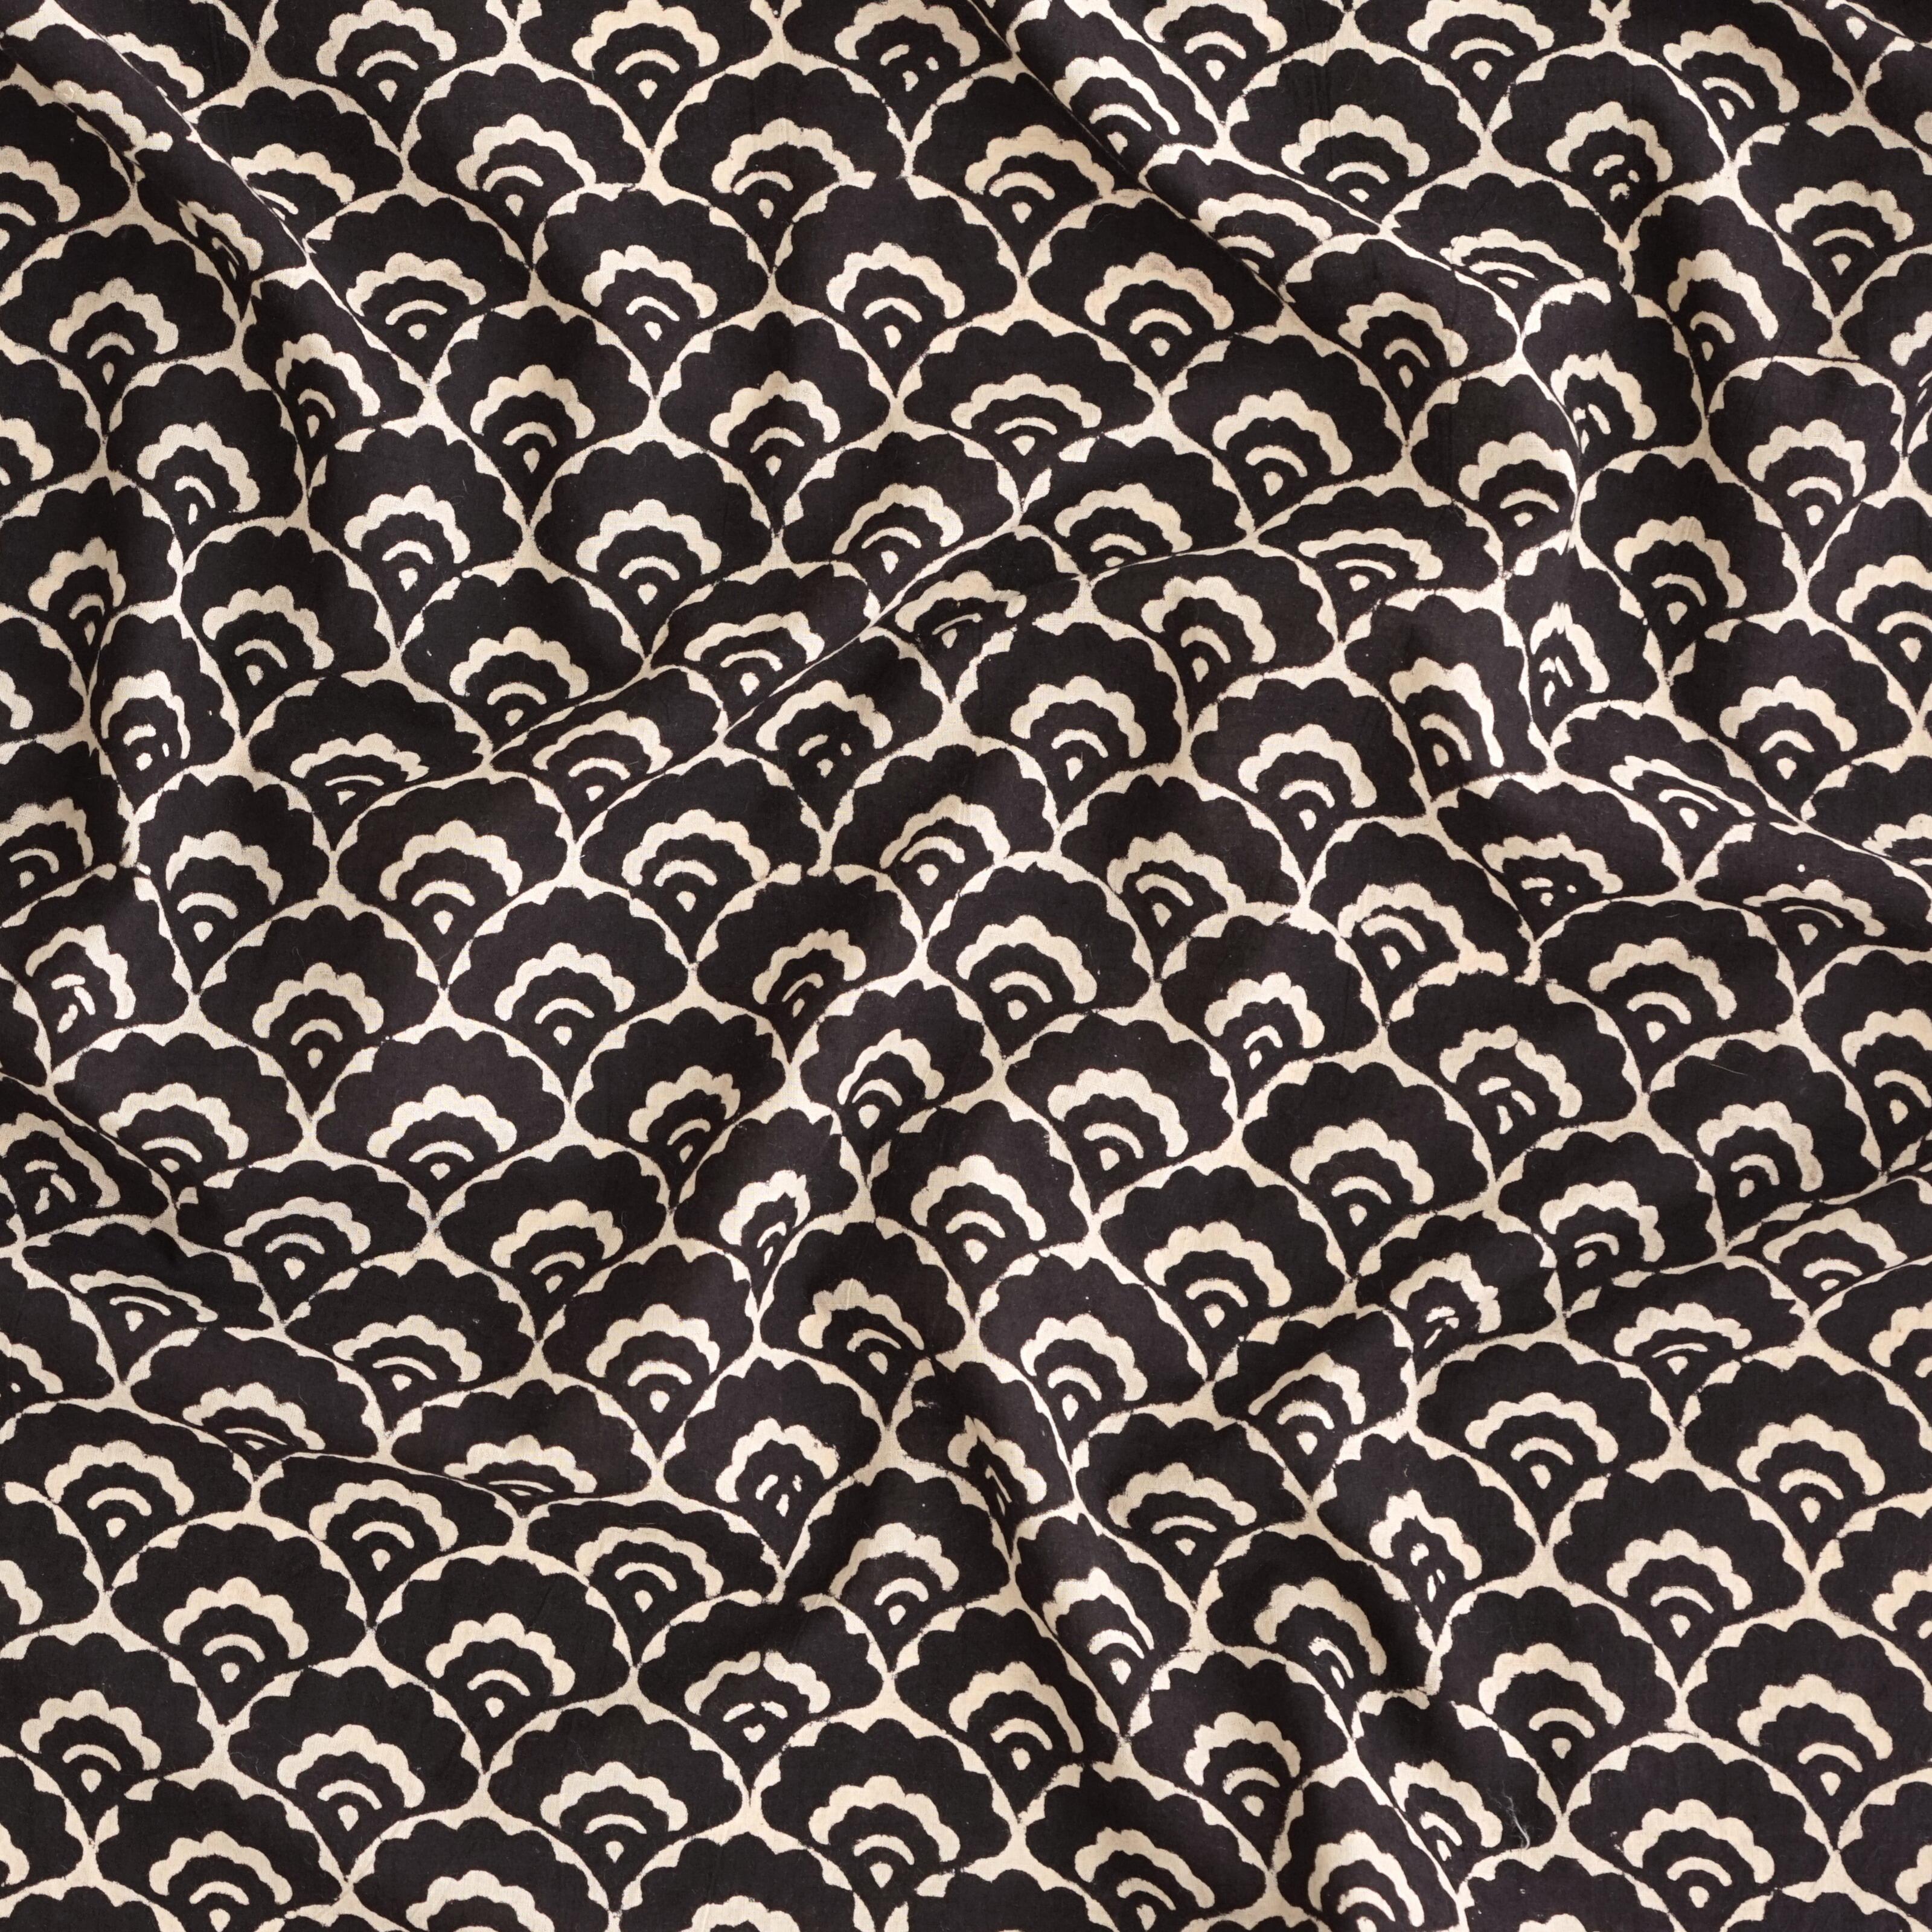 Indian Hand Woodblock-Printed Cotton - Clouds Print - Printed With Natural Black Iron Rust Dye - Contrast